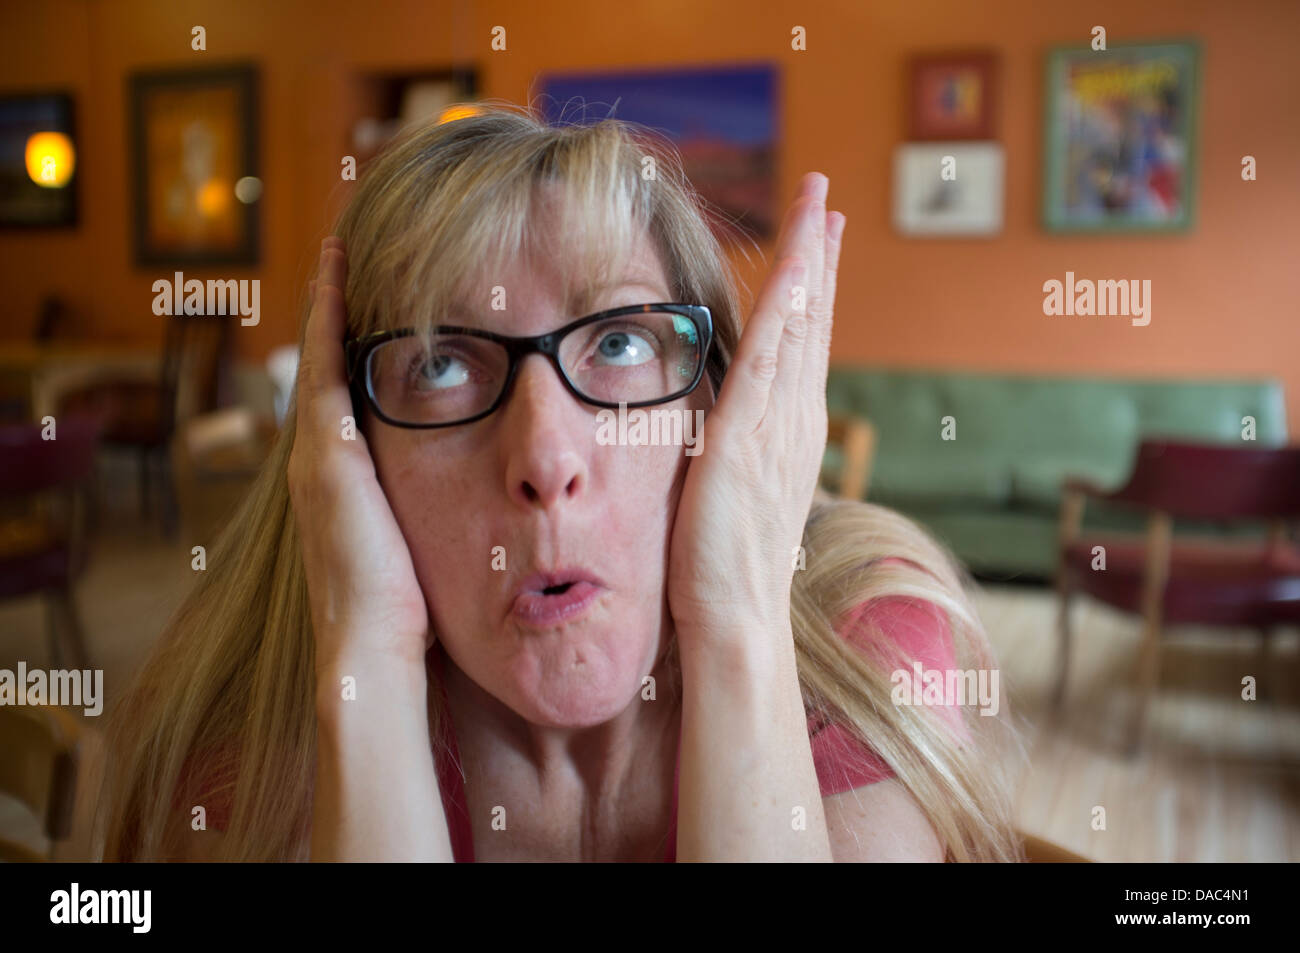 Female wearing glasses pushing her cheeks in with her hands and looking upward. Stock Photo